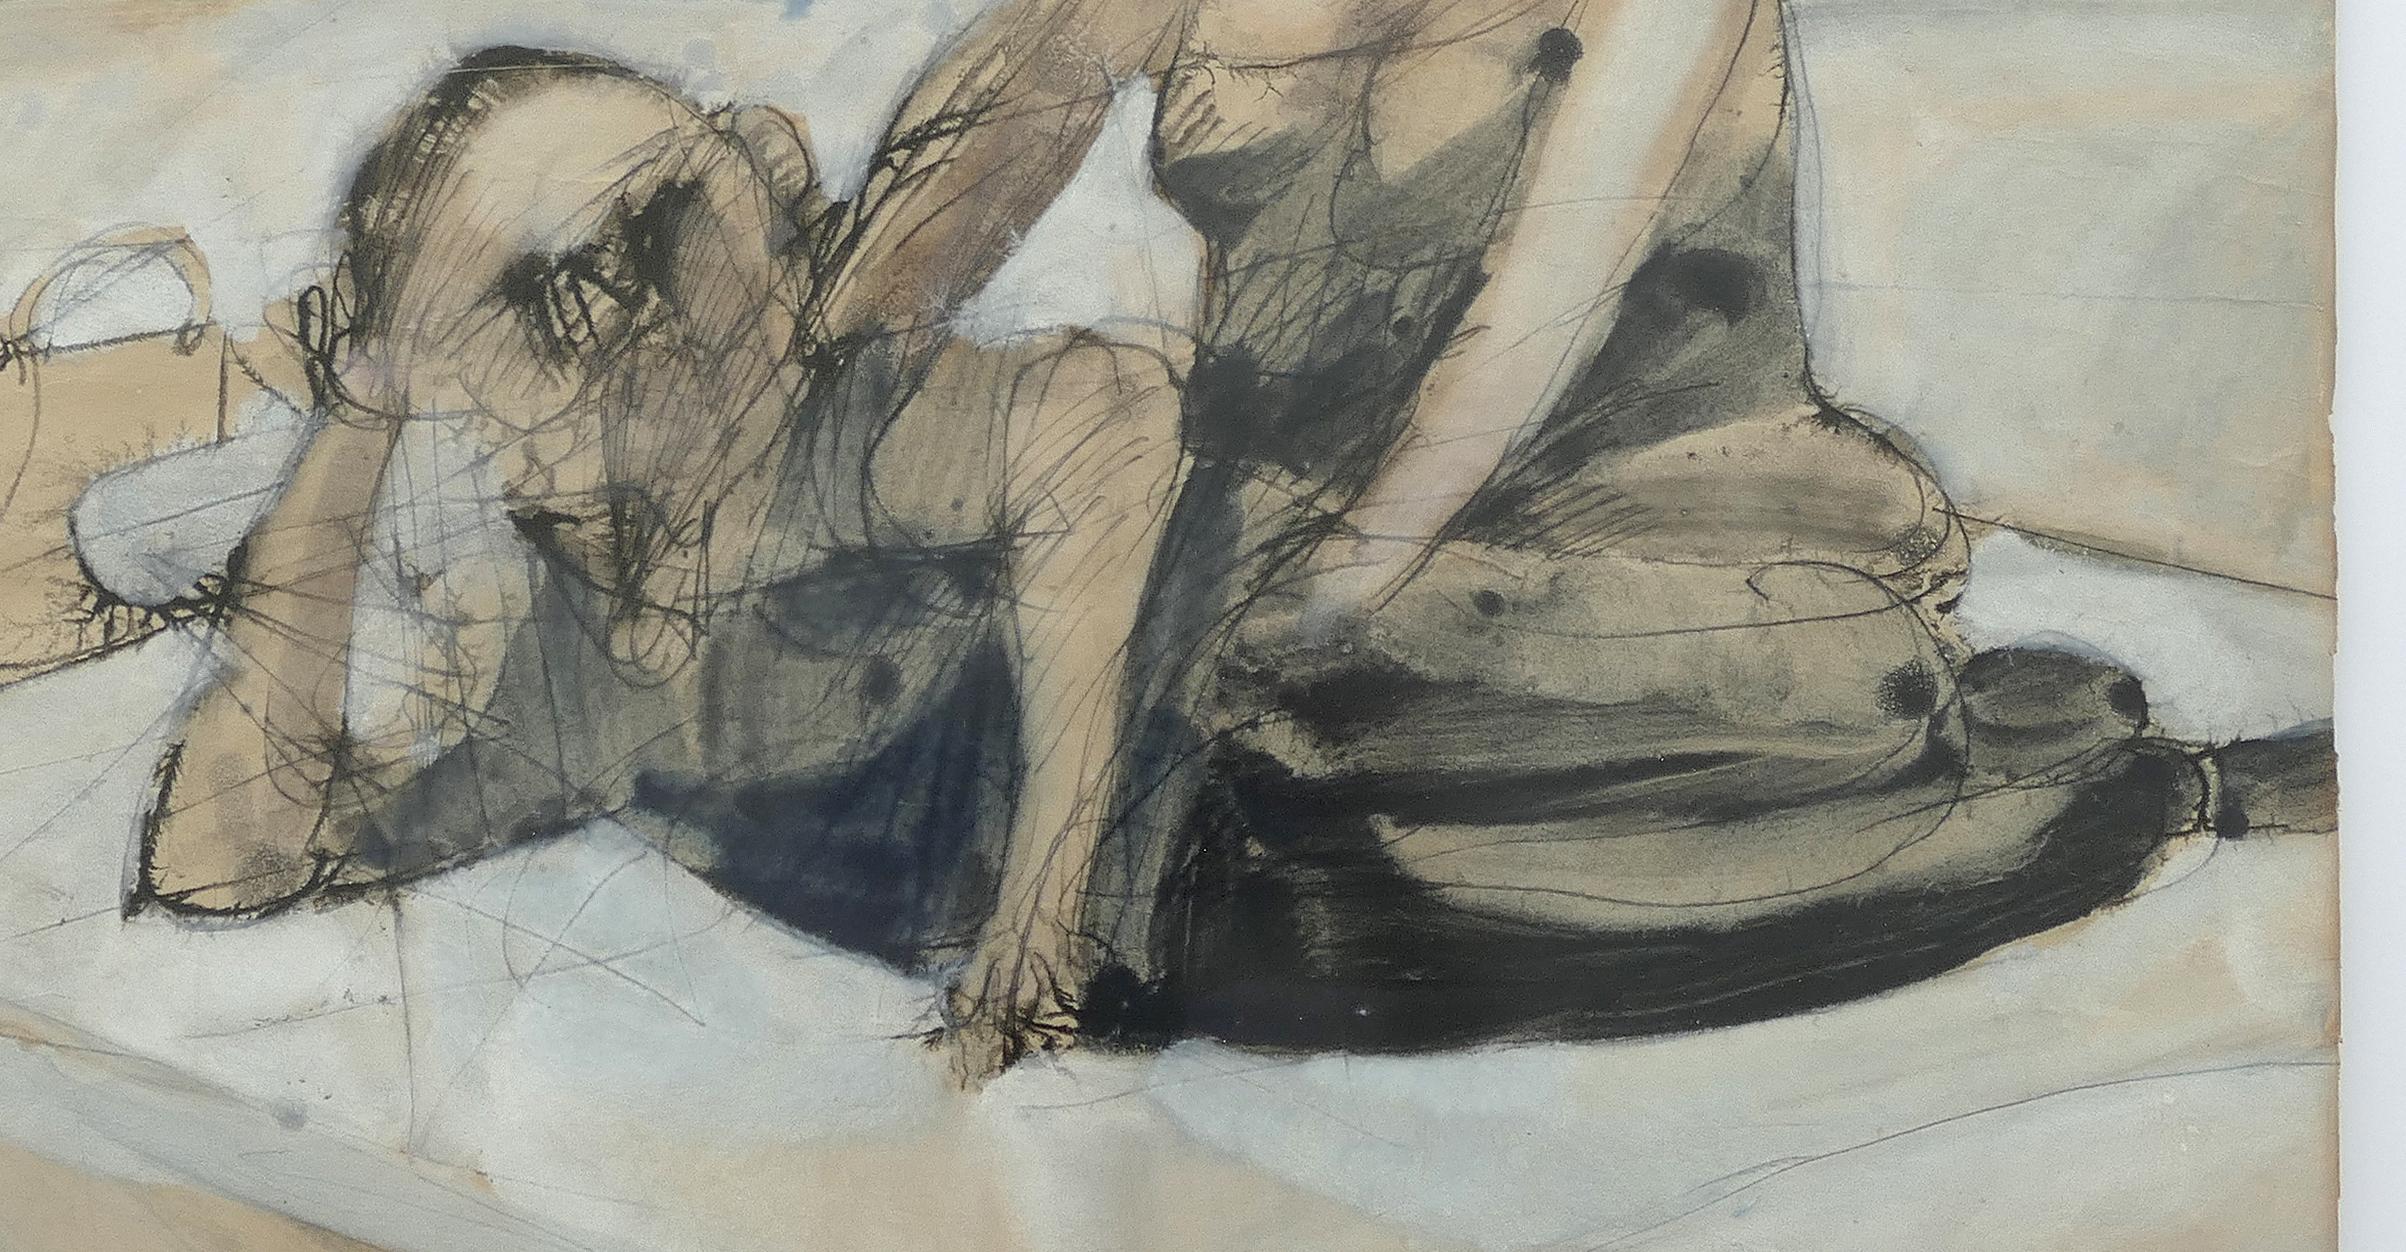 Robert Andrew Parker abstract painting, aquatint and ink figures at The Beach

Offered is an alluring vintage mixed media aquatint painting on paper with ink by the listed American artist Robert Andrew Parker. The work shows distressed edges of